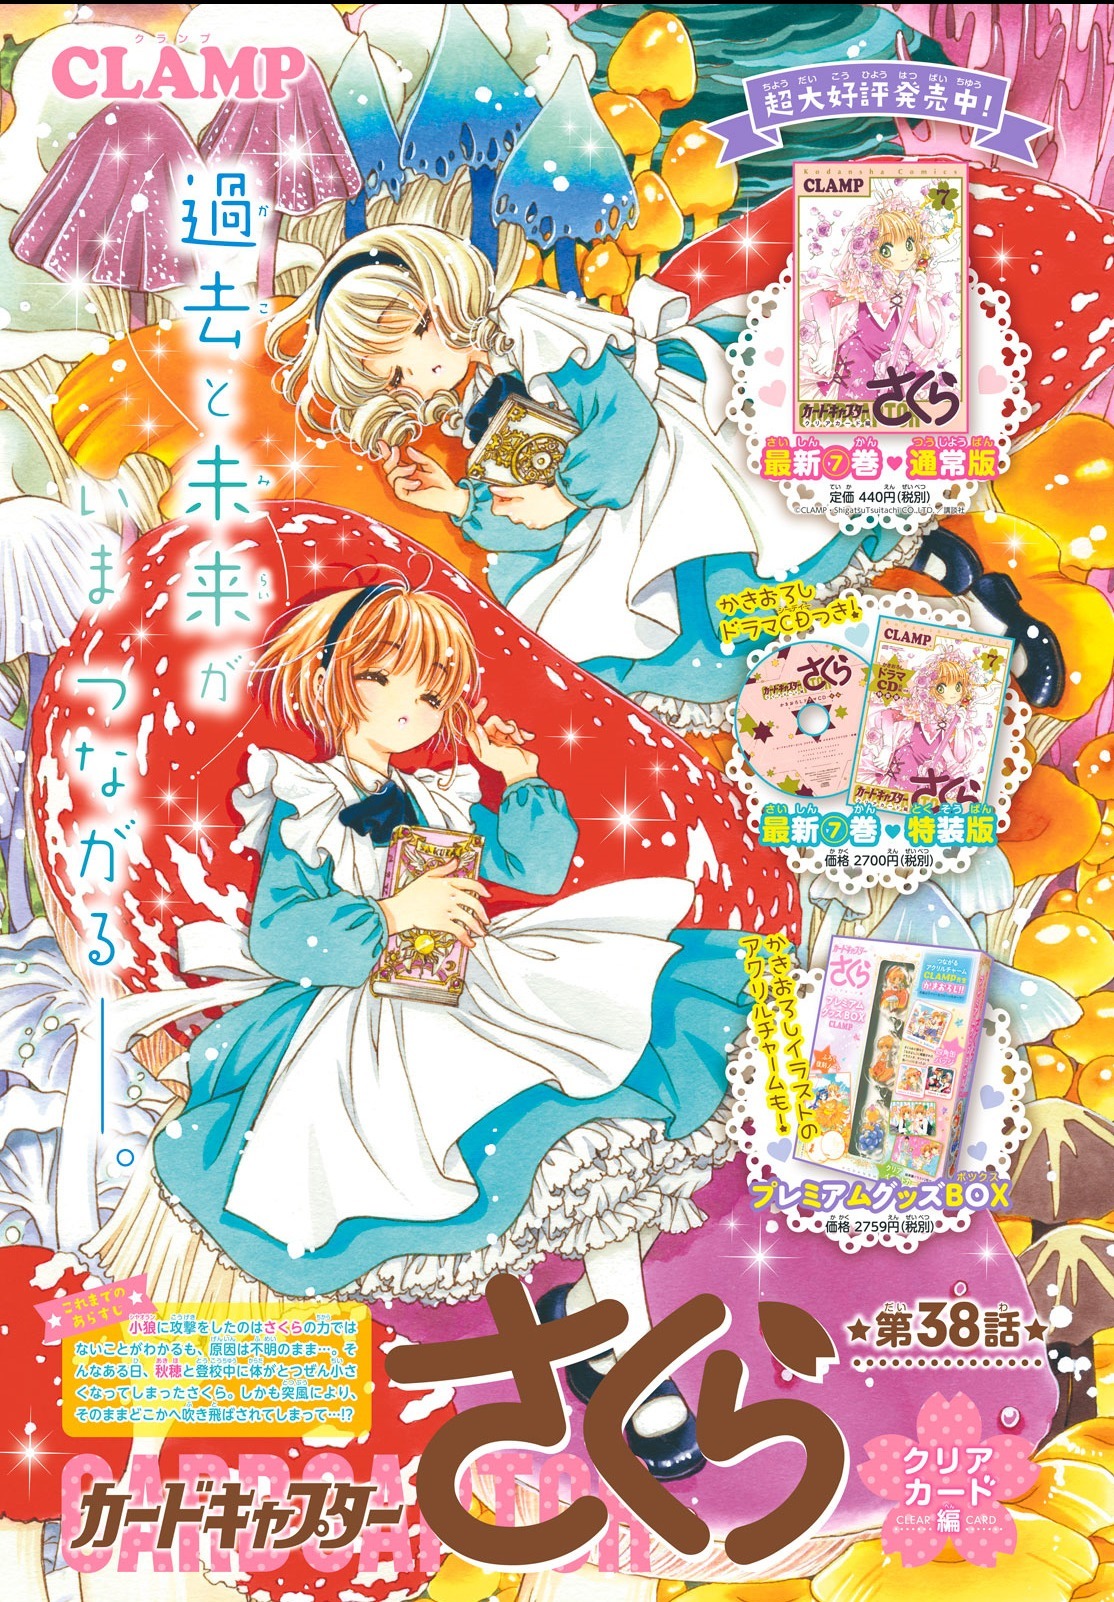 Art] Cardcaptor Sakura Clear Card chapter 79 by Clamp. Chapter 80 will be  the final chapter of the clear card manga series. : r/manga